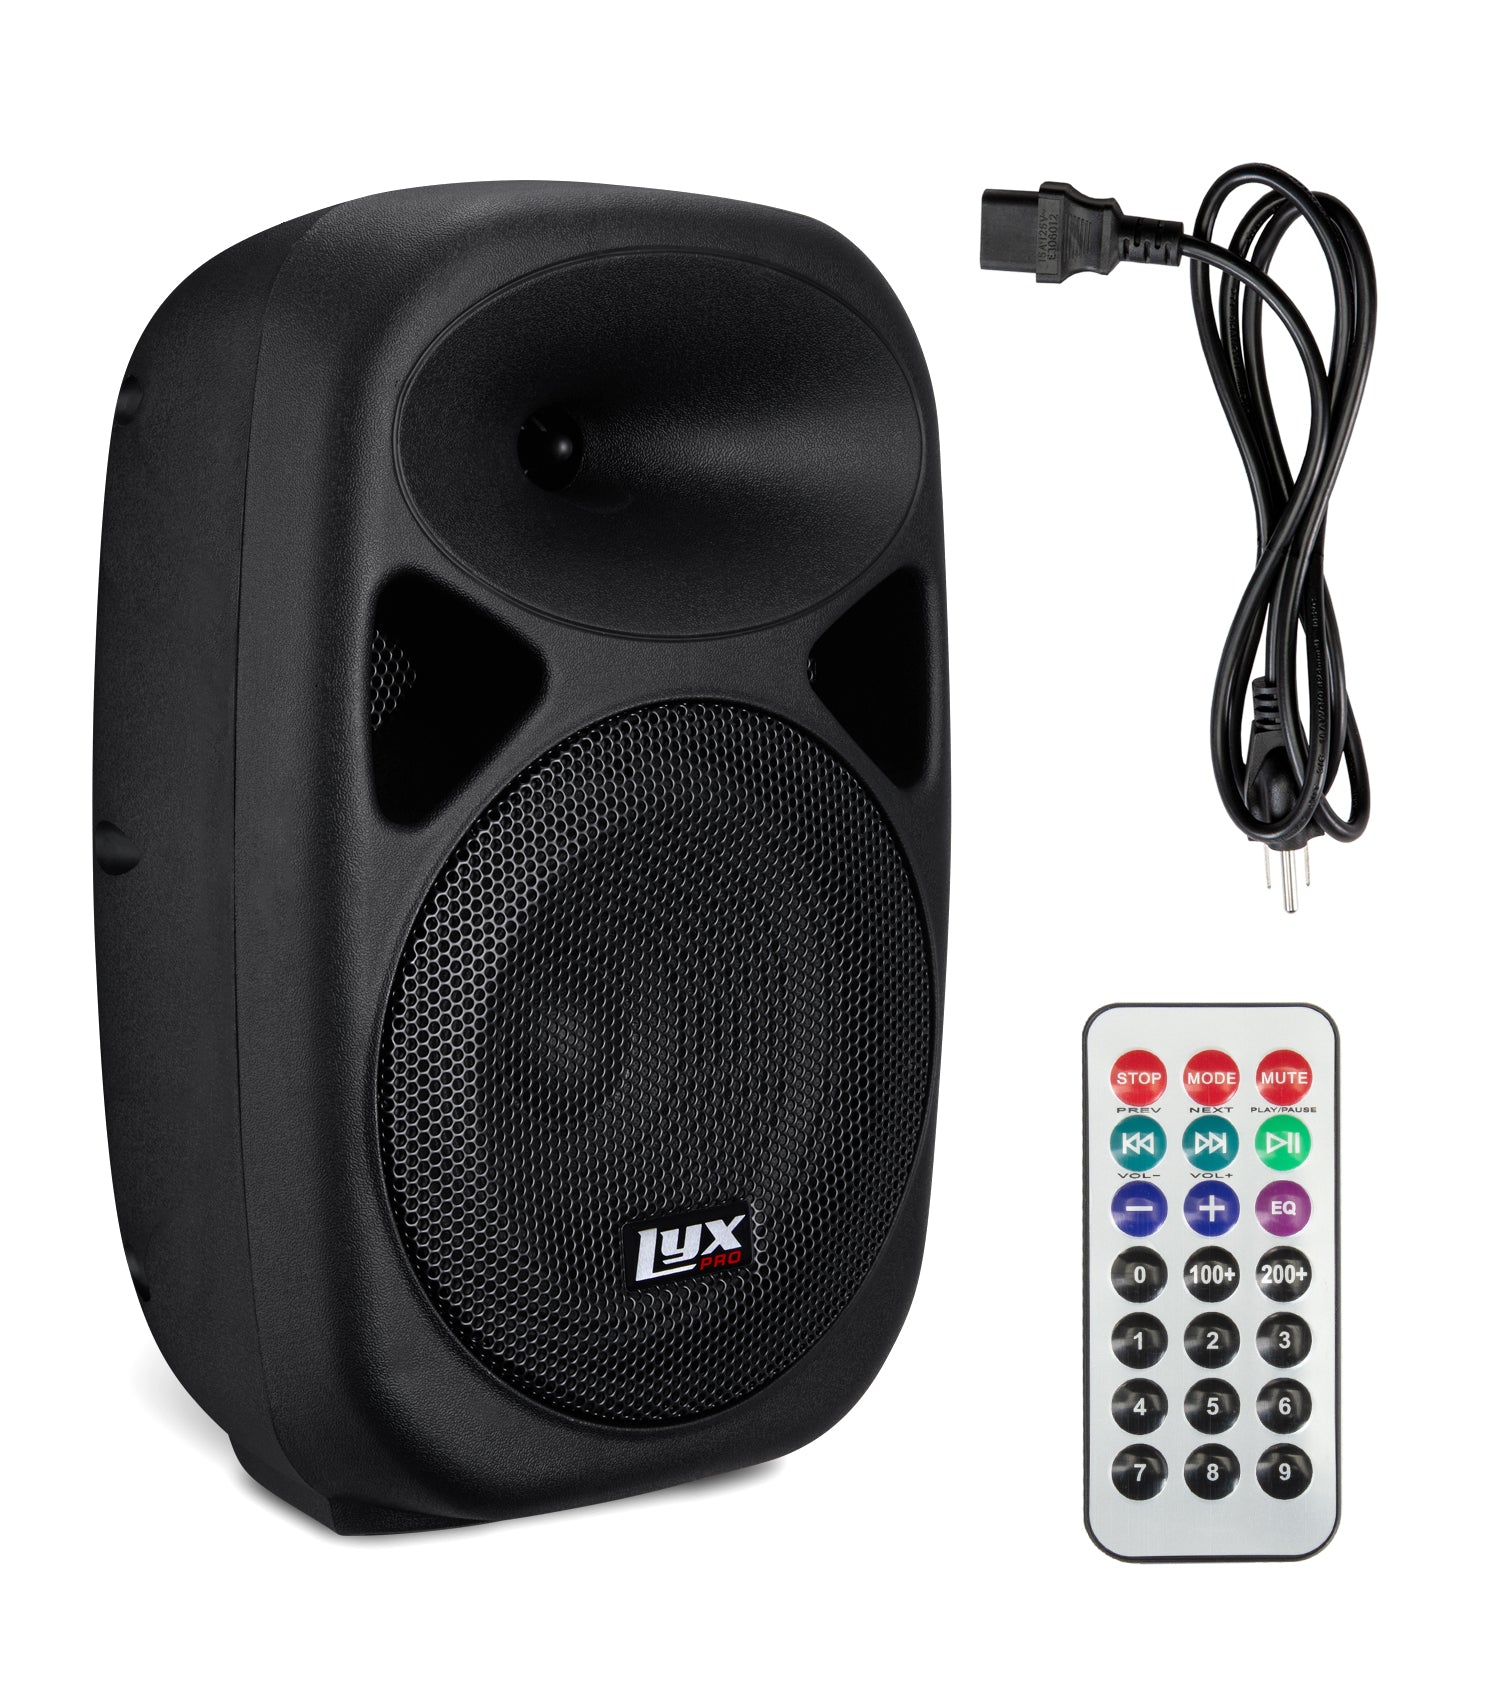 8” portable battery-powered PA speaker, cord, and remote 